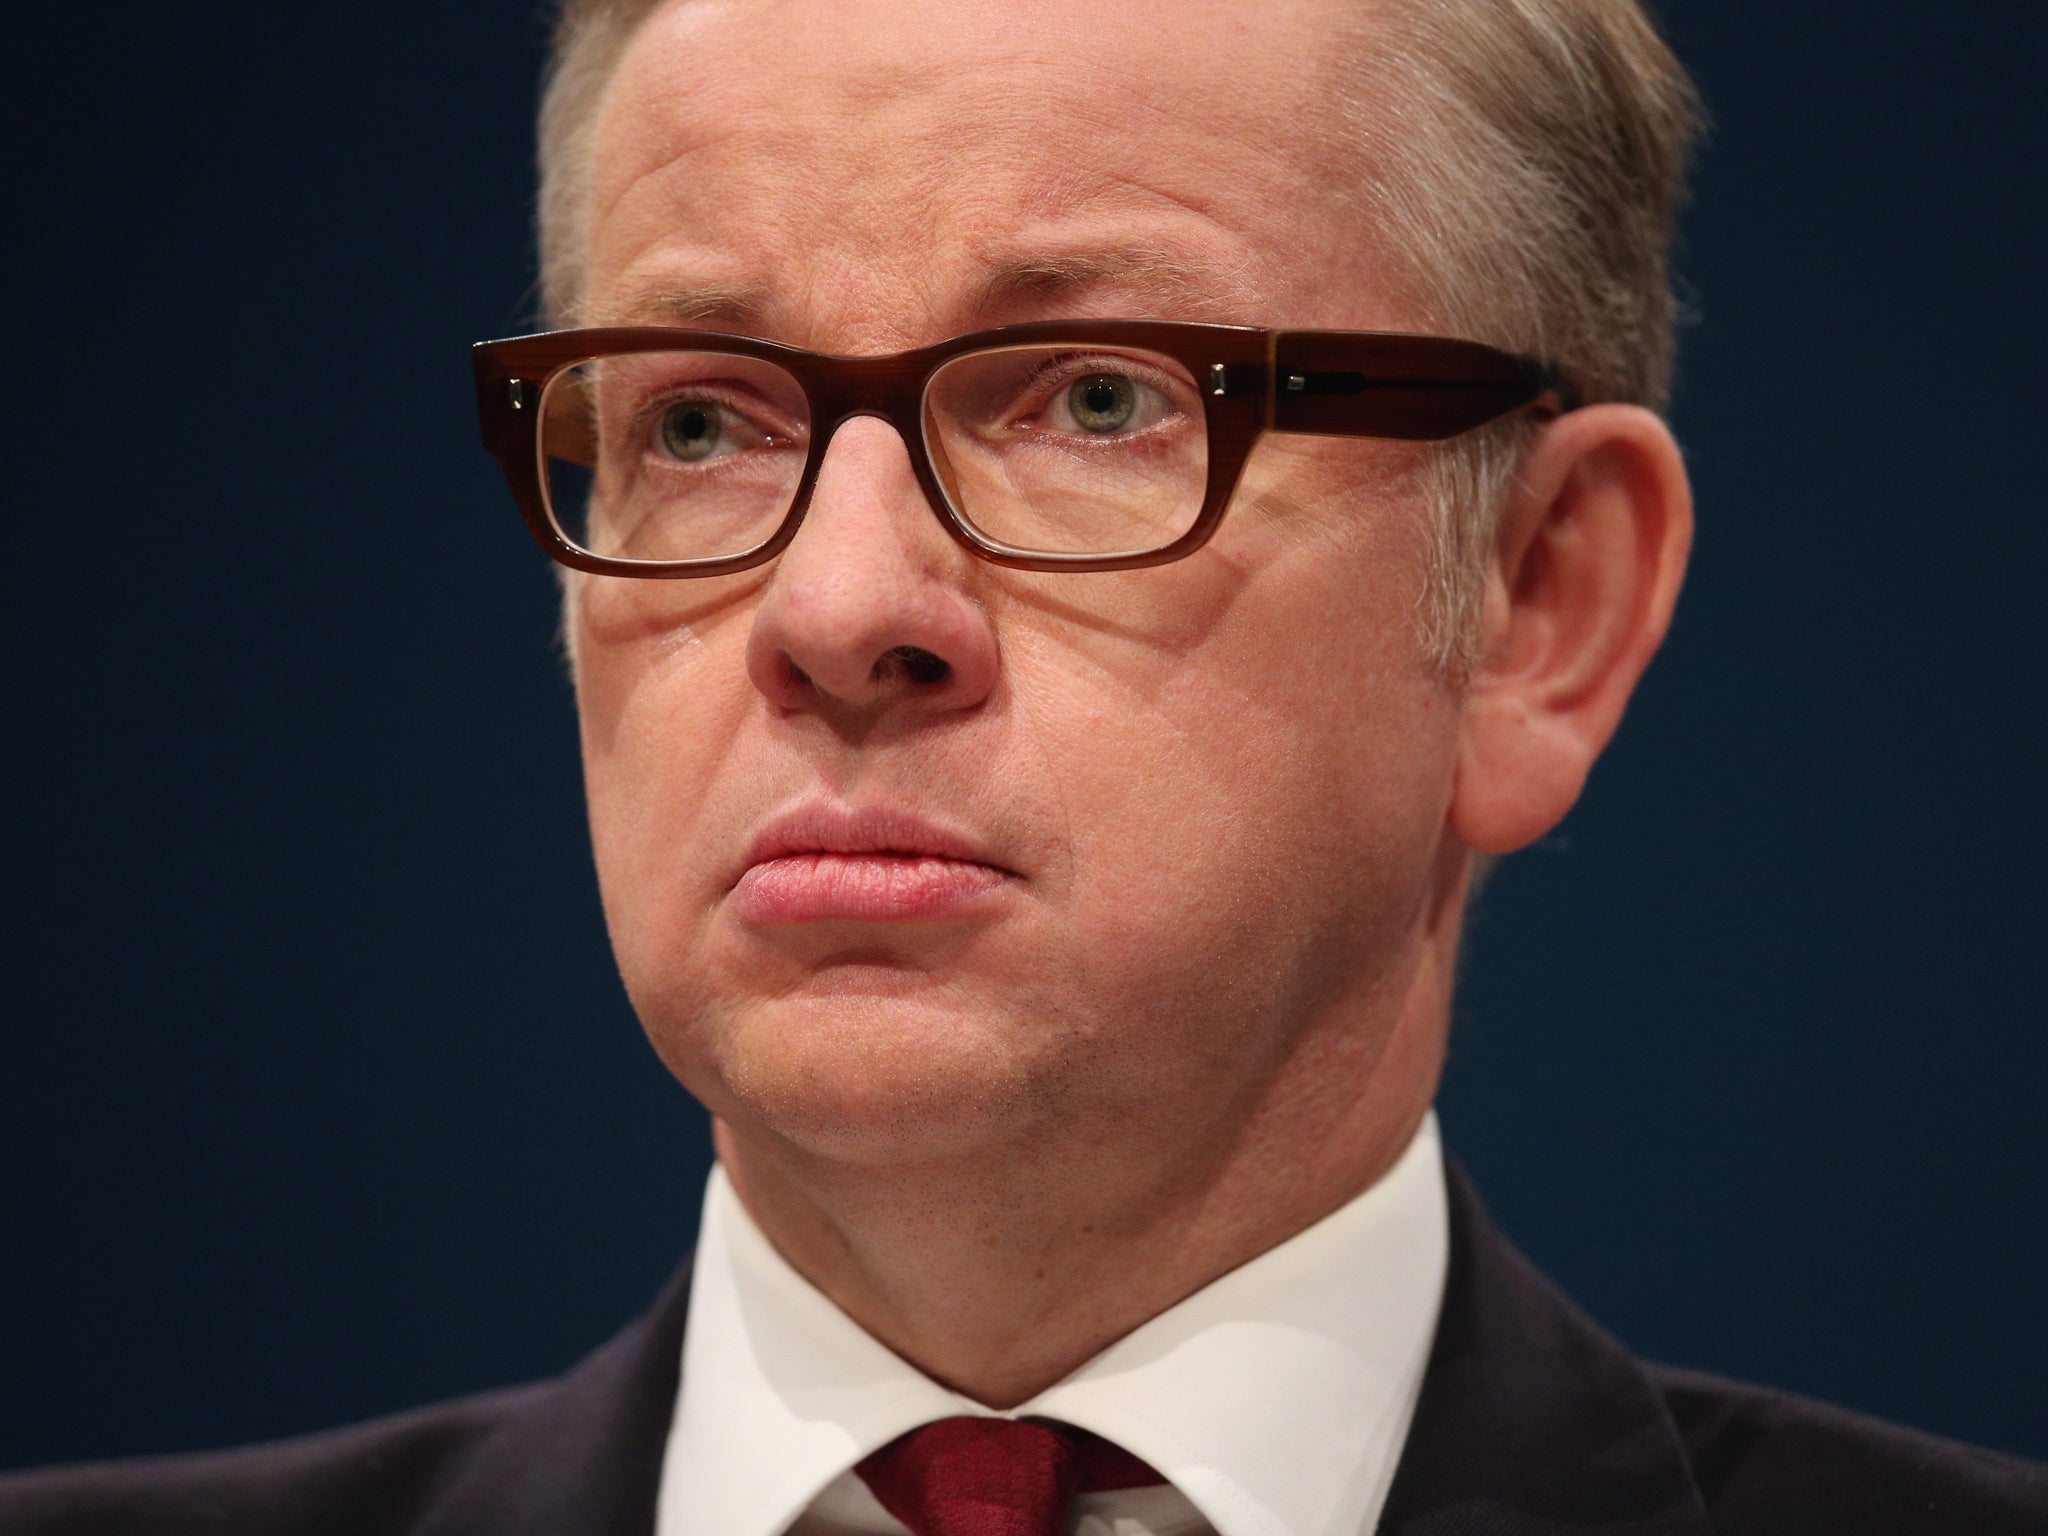 Teachers are campaigning against Michael Gove's planned education reforms